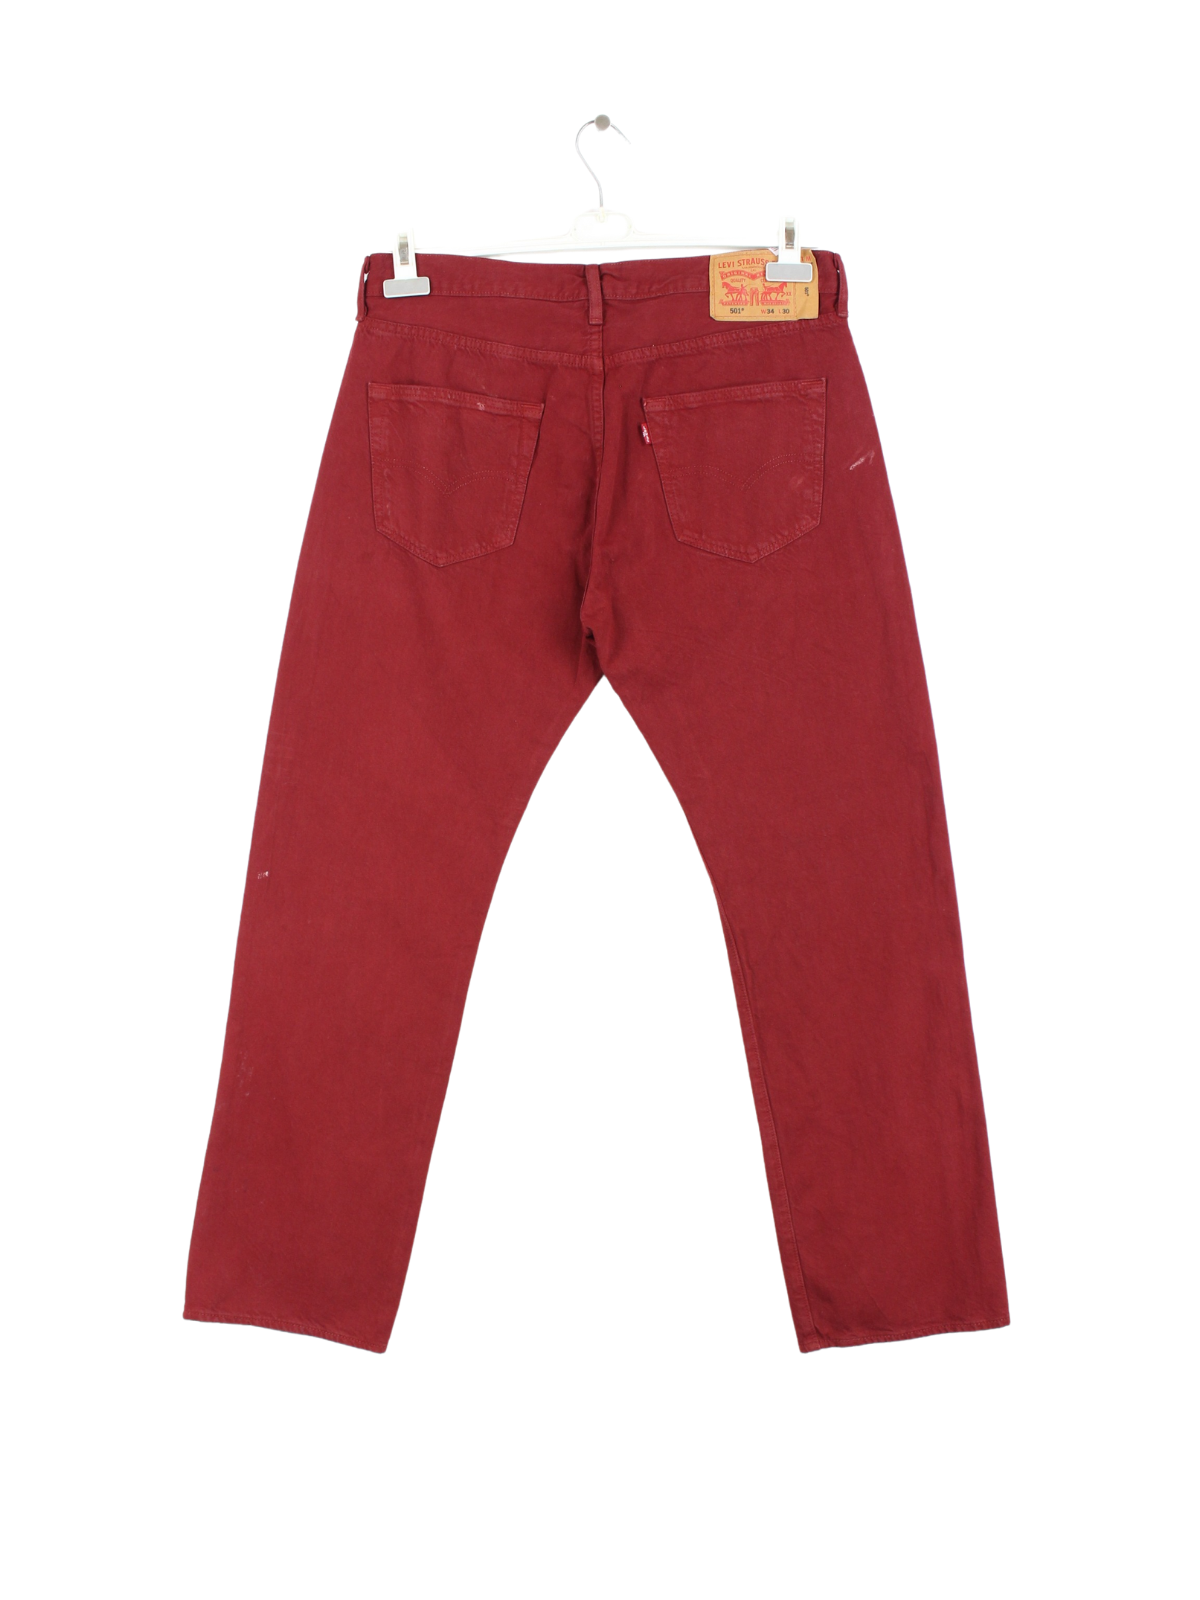 Kids Clothing-Boys Clothing-Boys Jeans & Trousers – Page 2 – Cotton Candy™  Pakistan